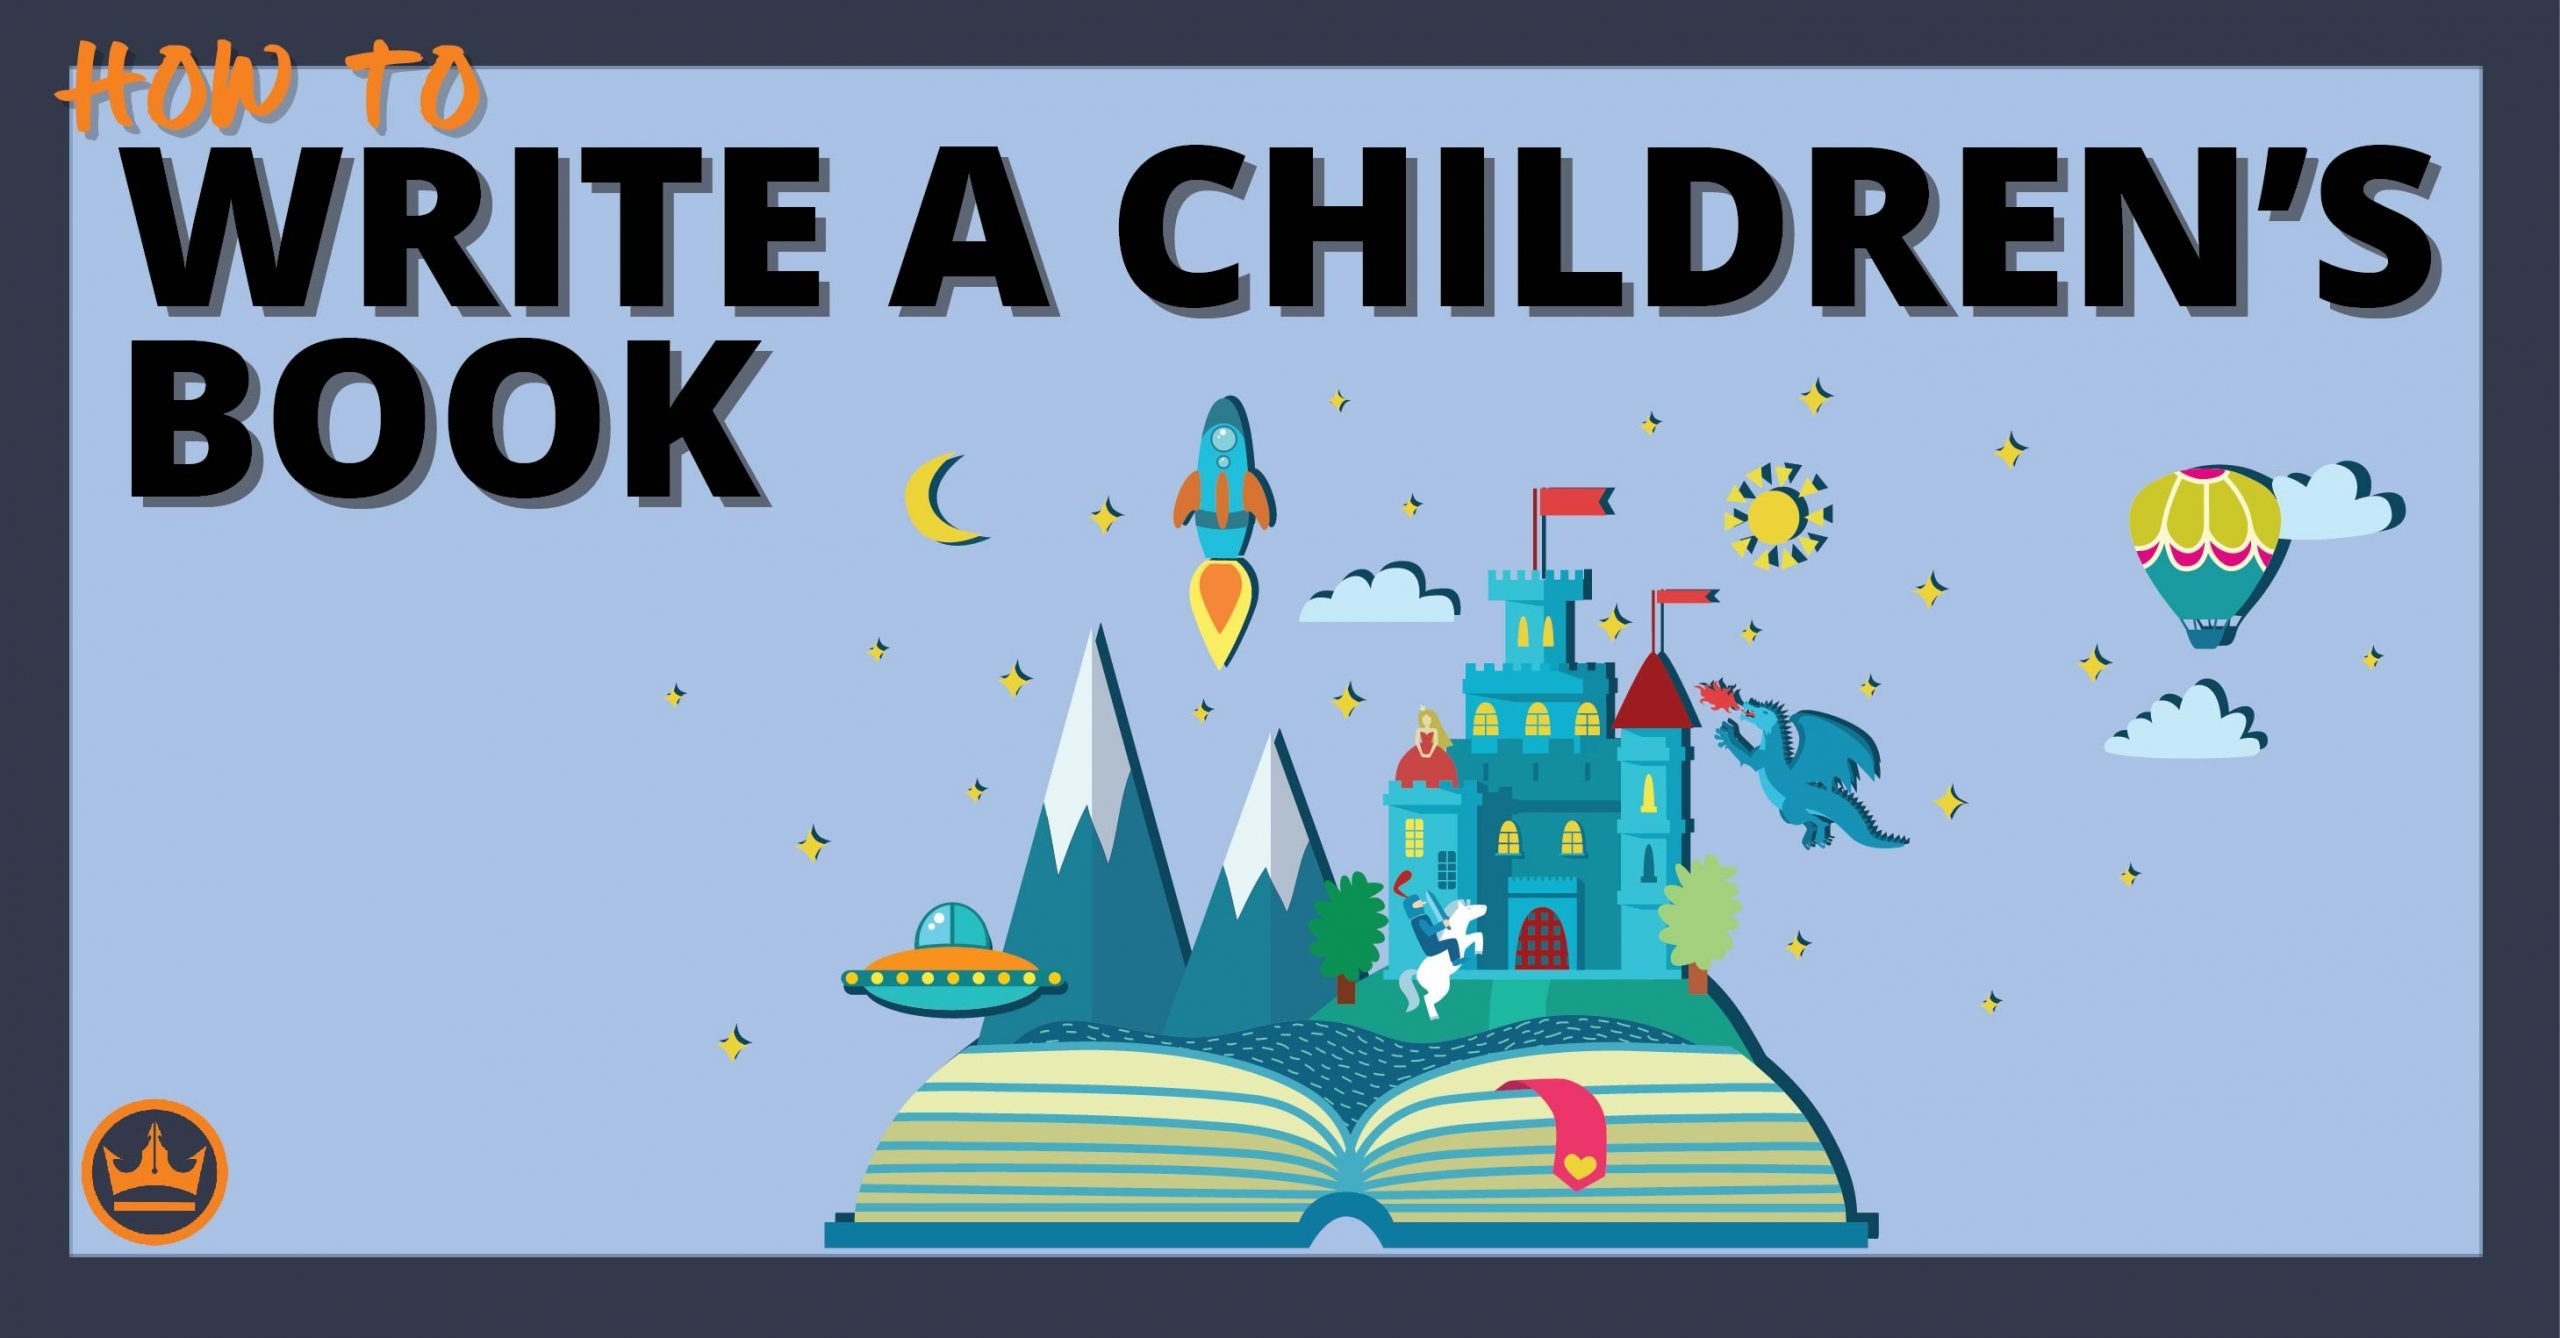 How To Publish A Children's Book With KDP? Get The Best Amateur Writer Course